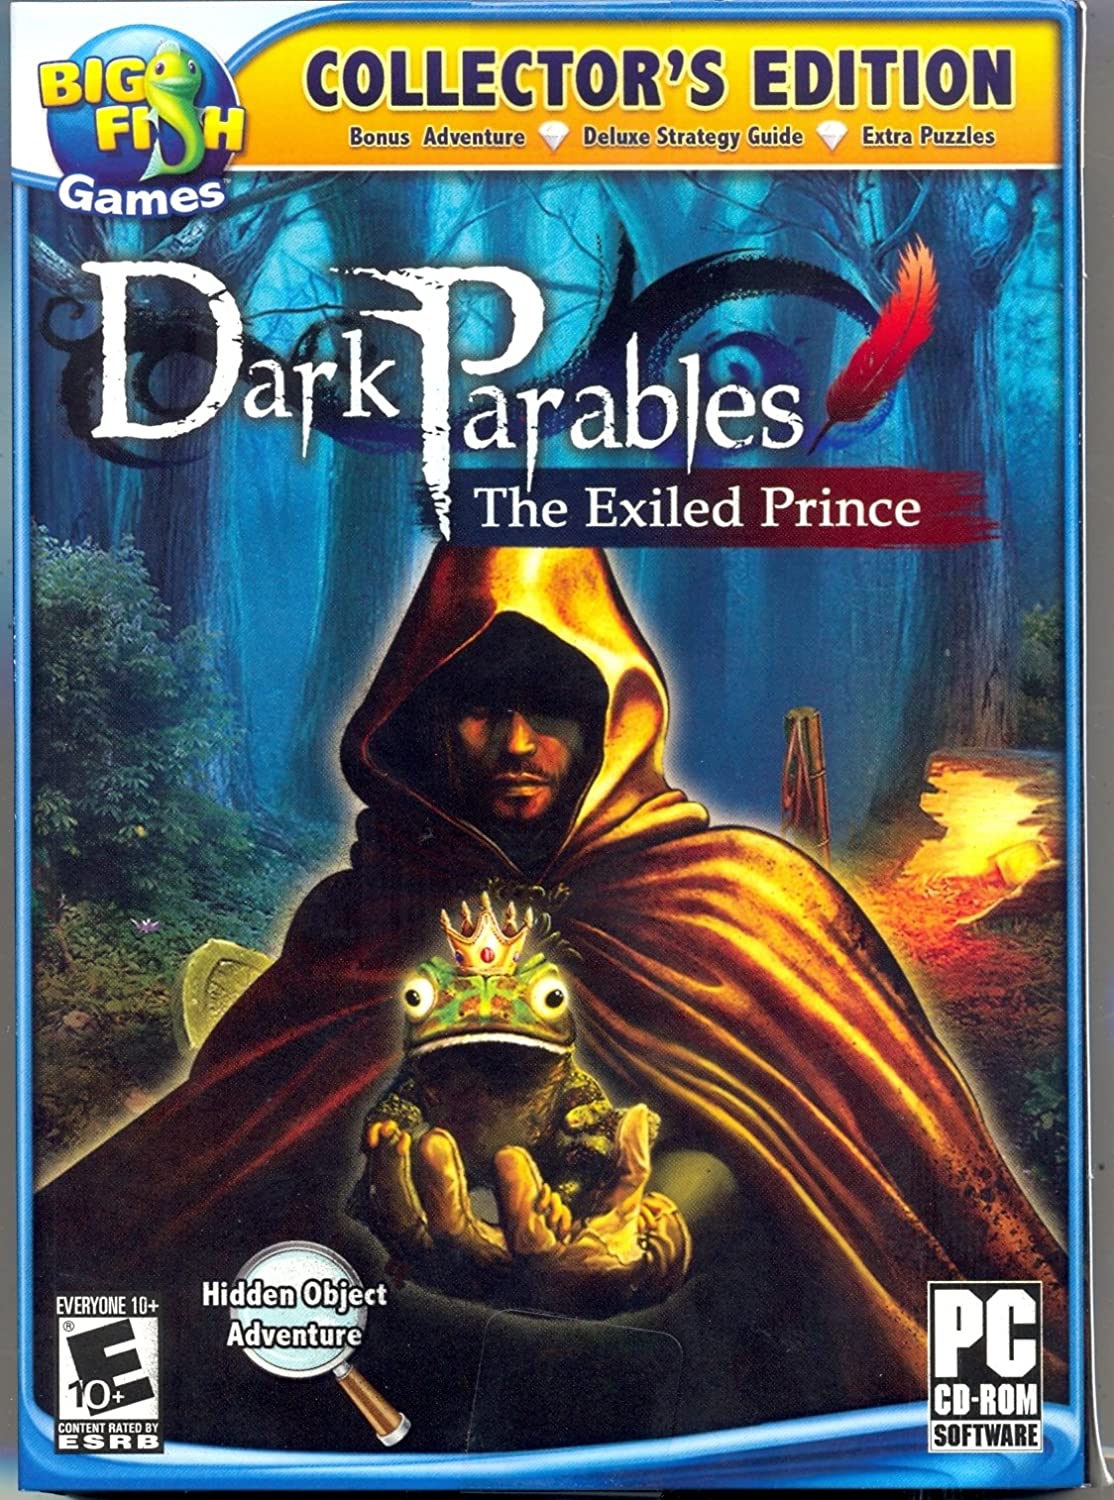 Dark Parables: The Exiled Prince Collector’s Edition PC